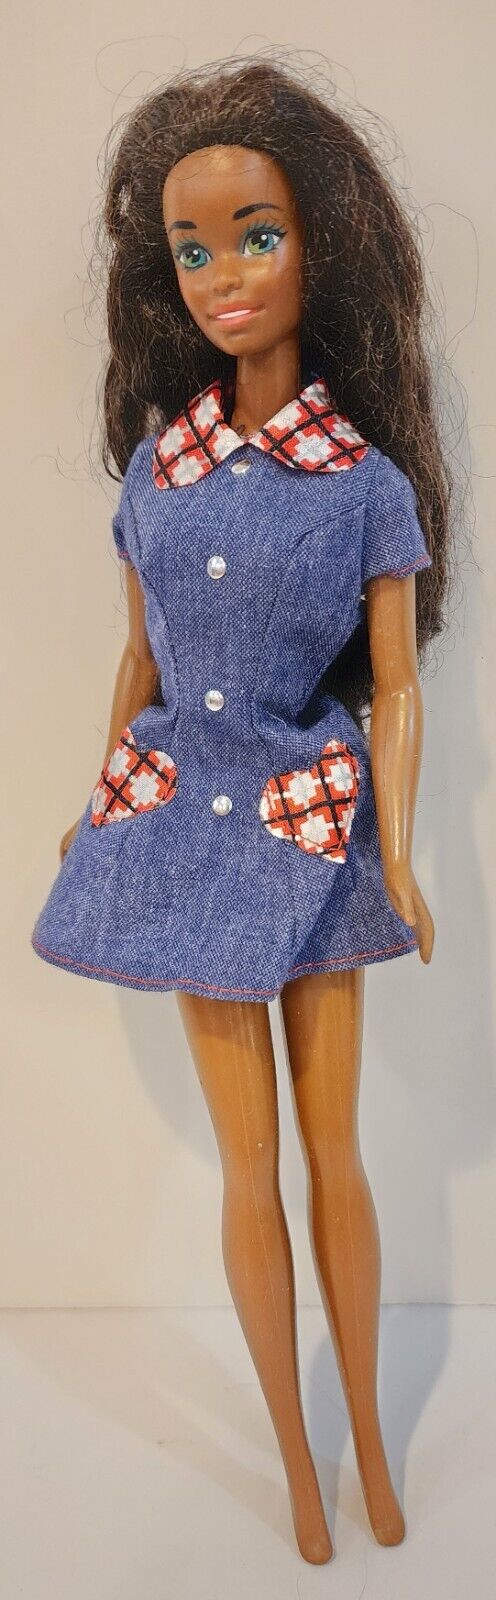 Mattel 1997 Barbie Style Doll - African American Very Rare